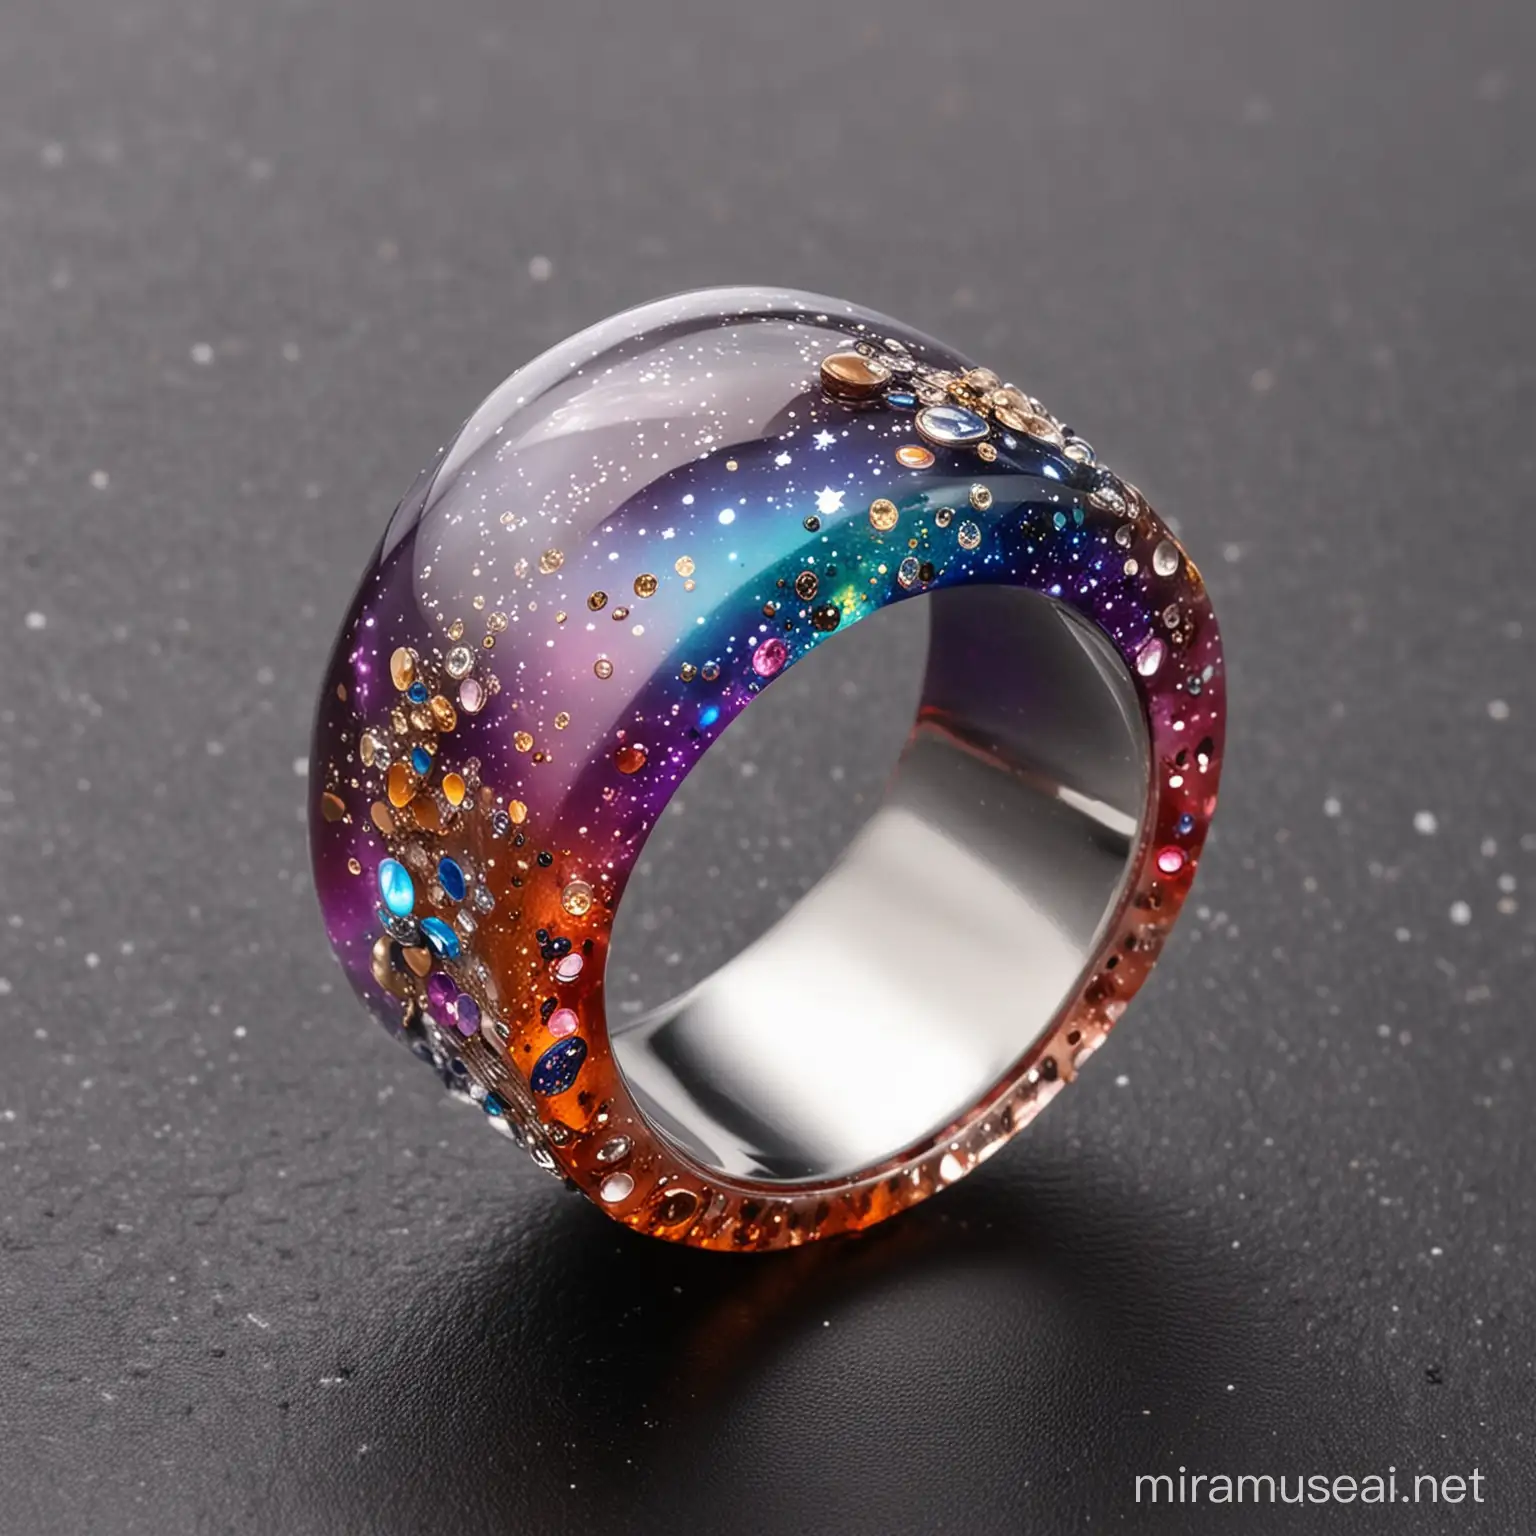 Galaxy Resin Ring with Sparkling Stones Celestial Inspired Jewelry